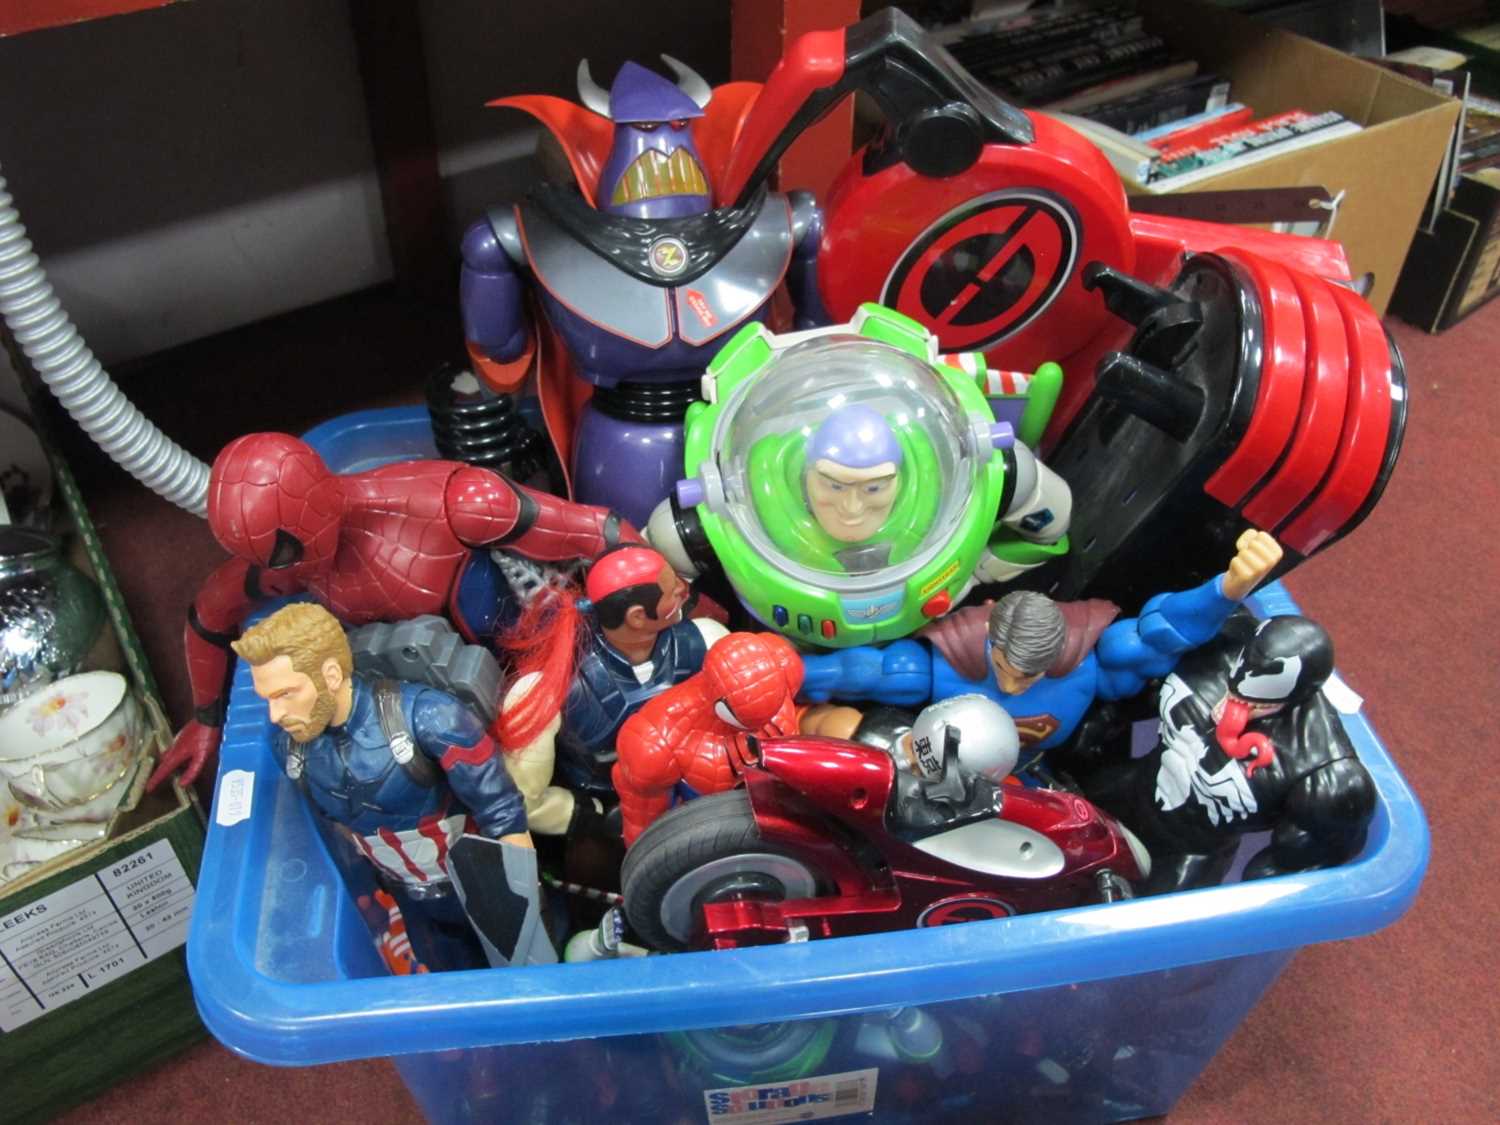 A Selection of Modern Action Figures, including Spiderman, Buzz Lightyear, Power Rangers,